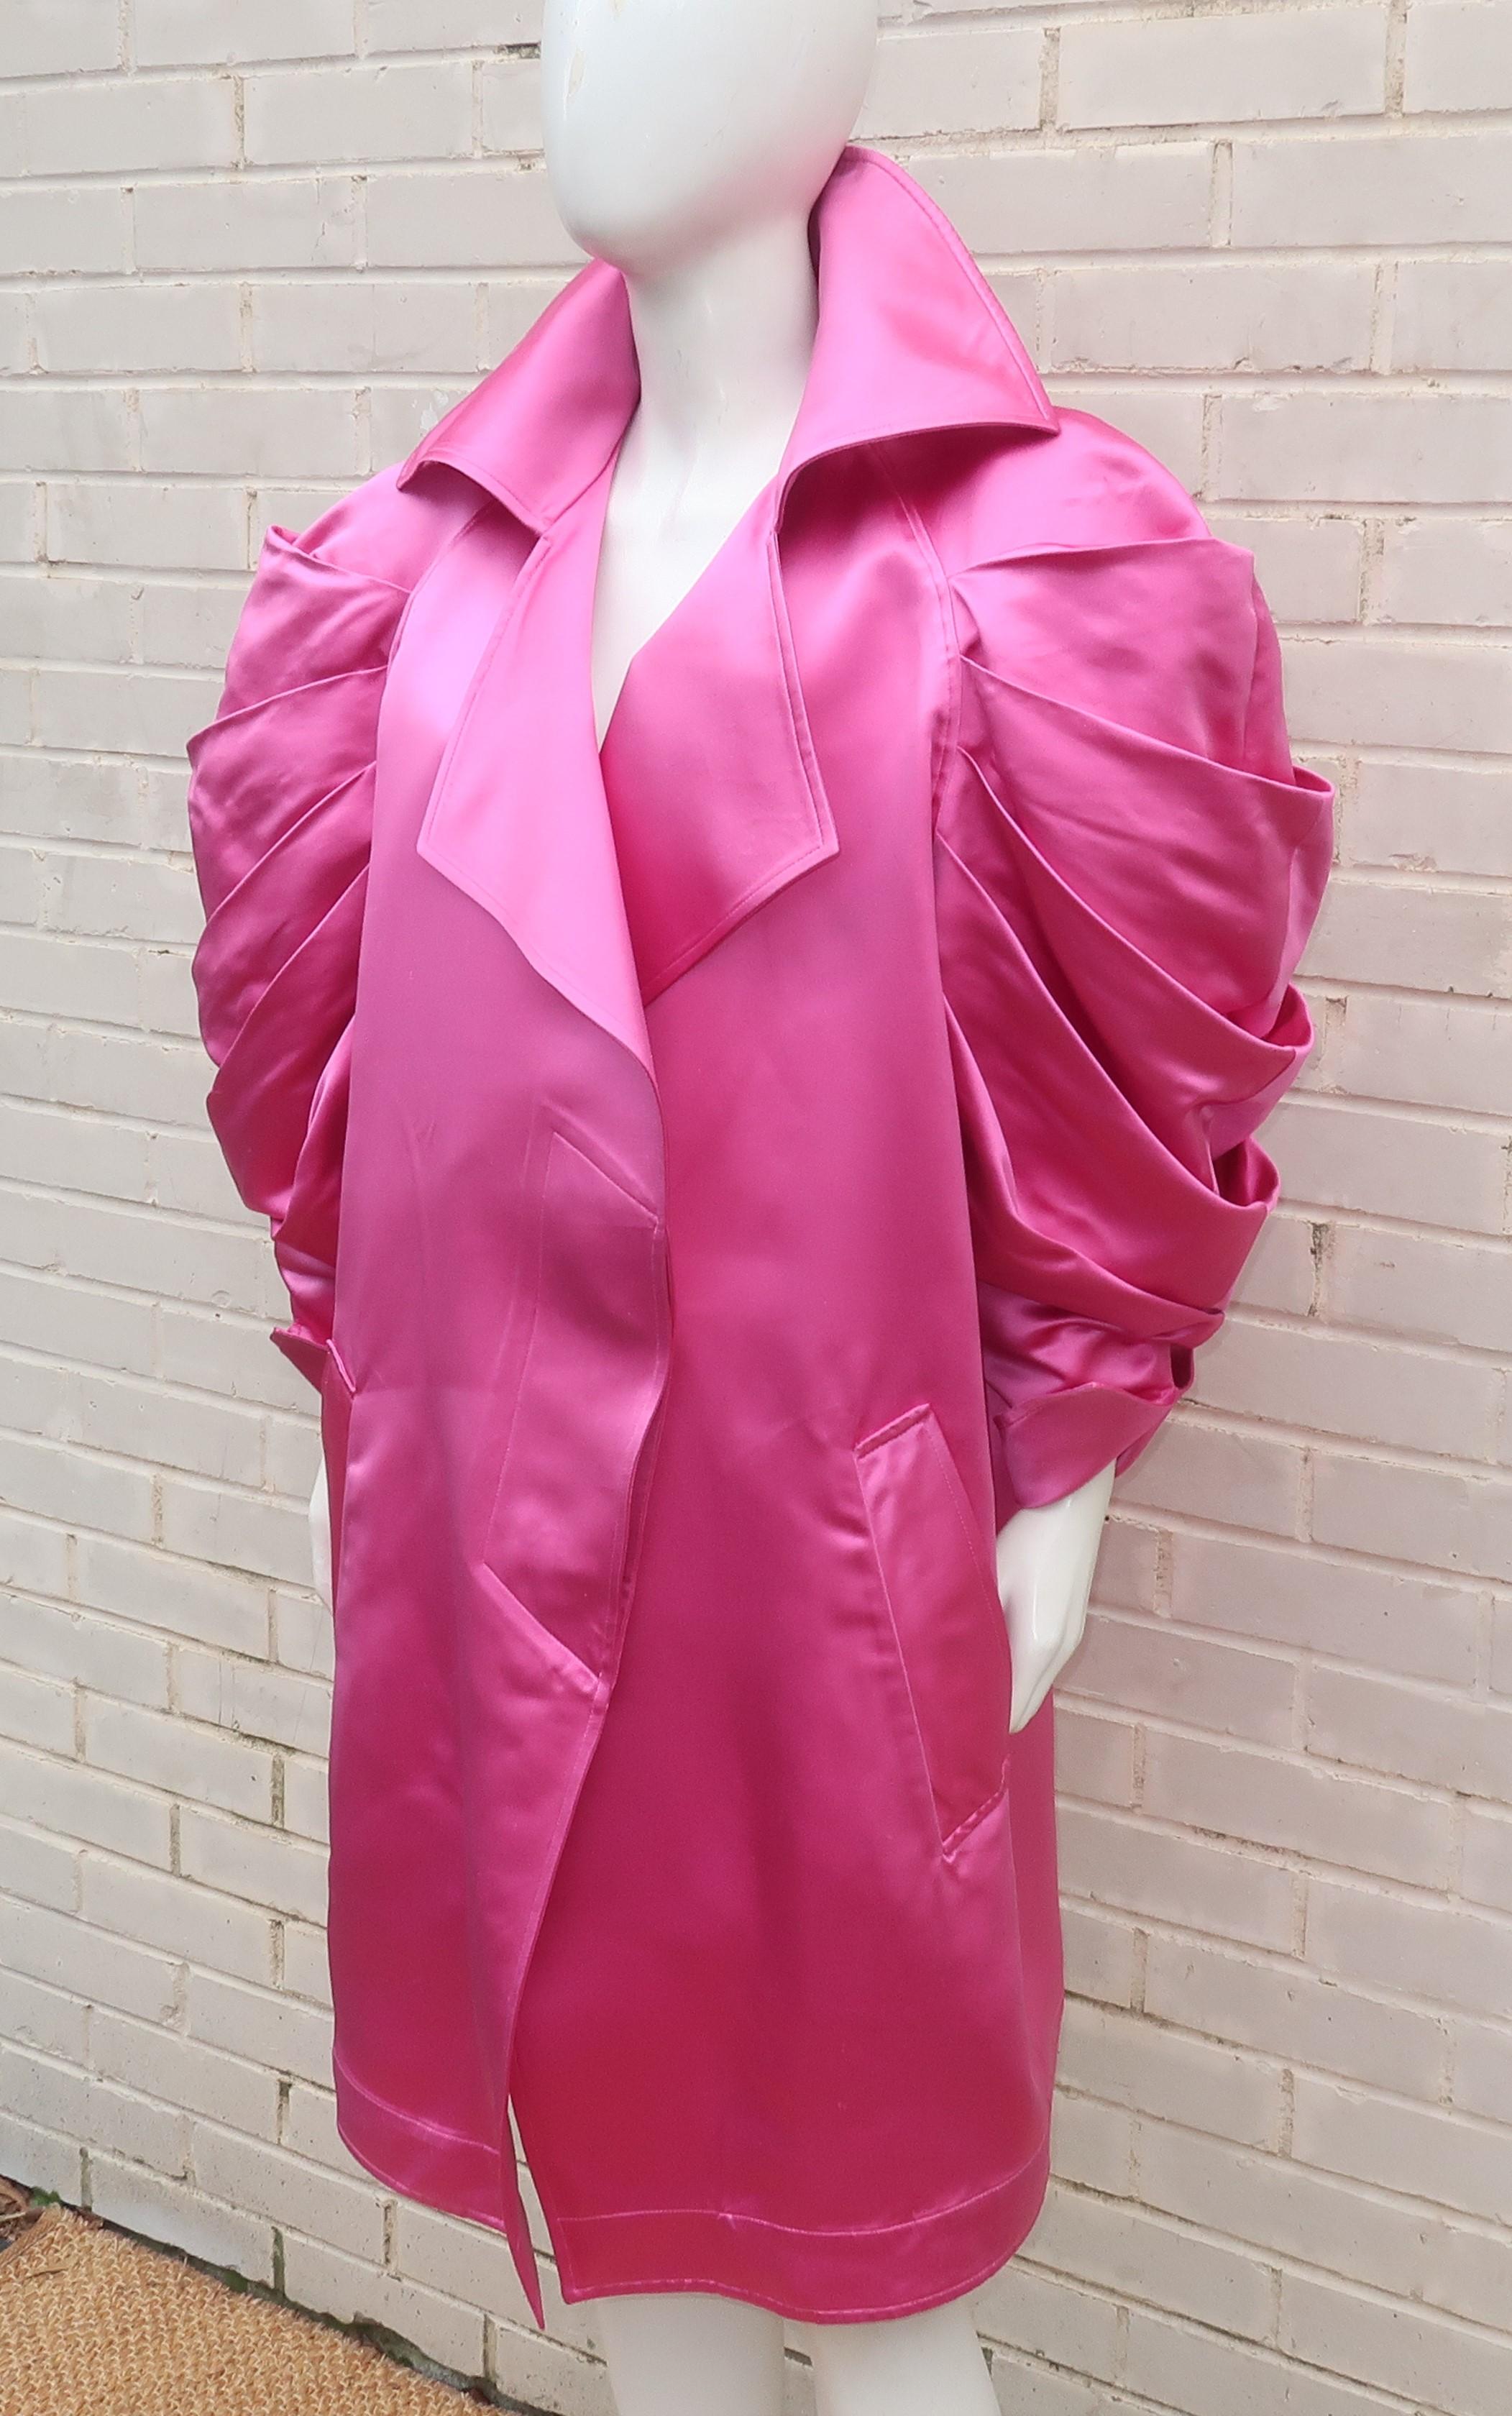 Claude Montana Hot Pink Silk Satin Coat With Ruched Sleeves, 1980's 5